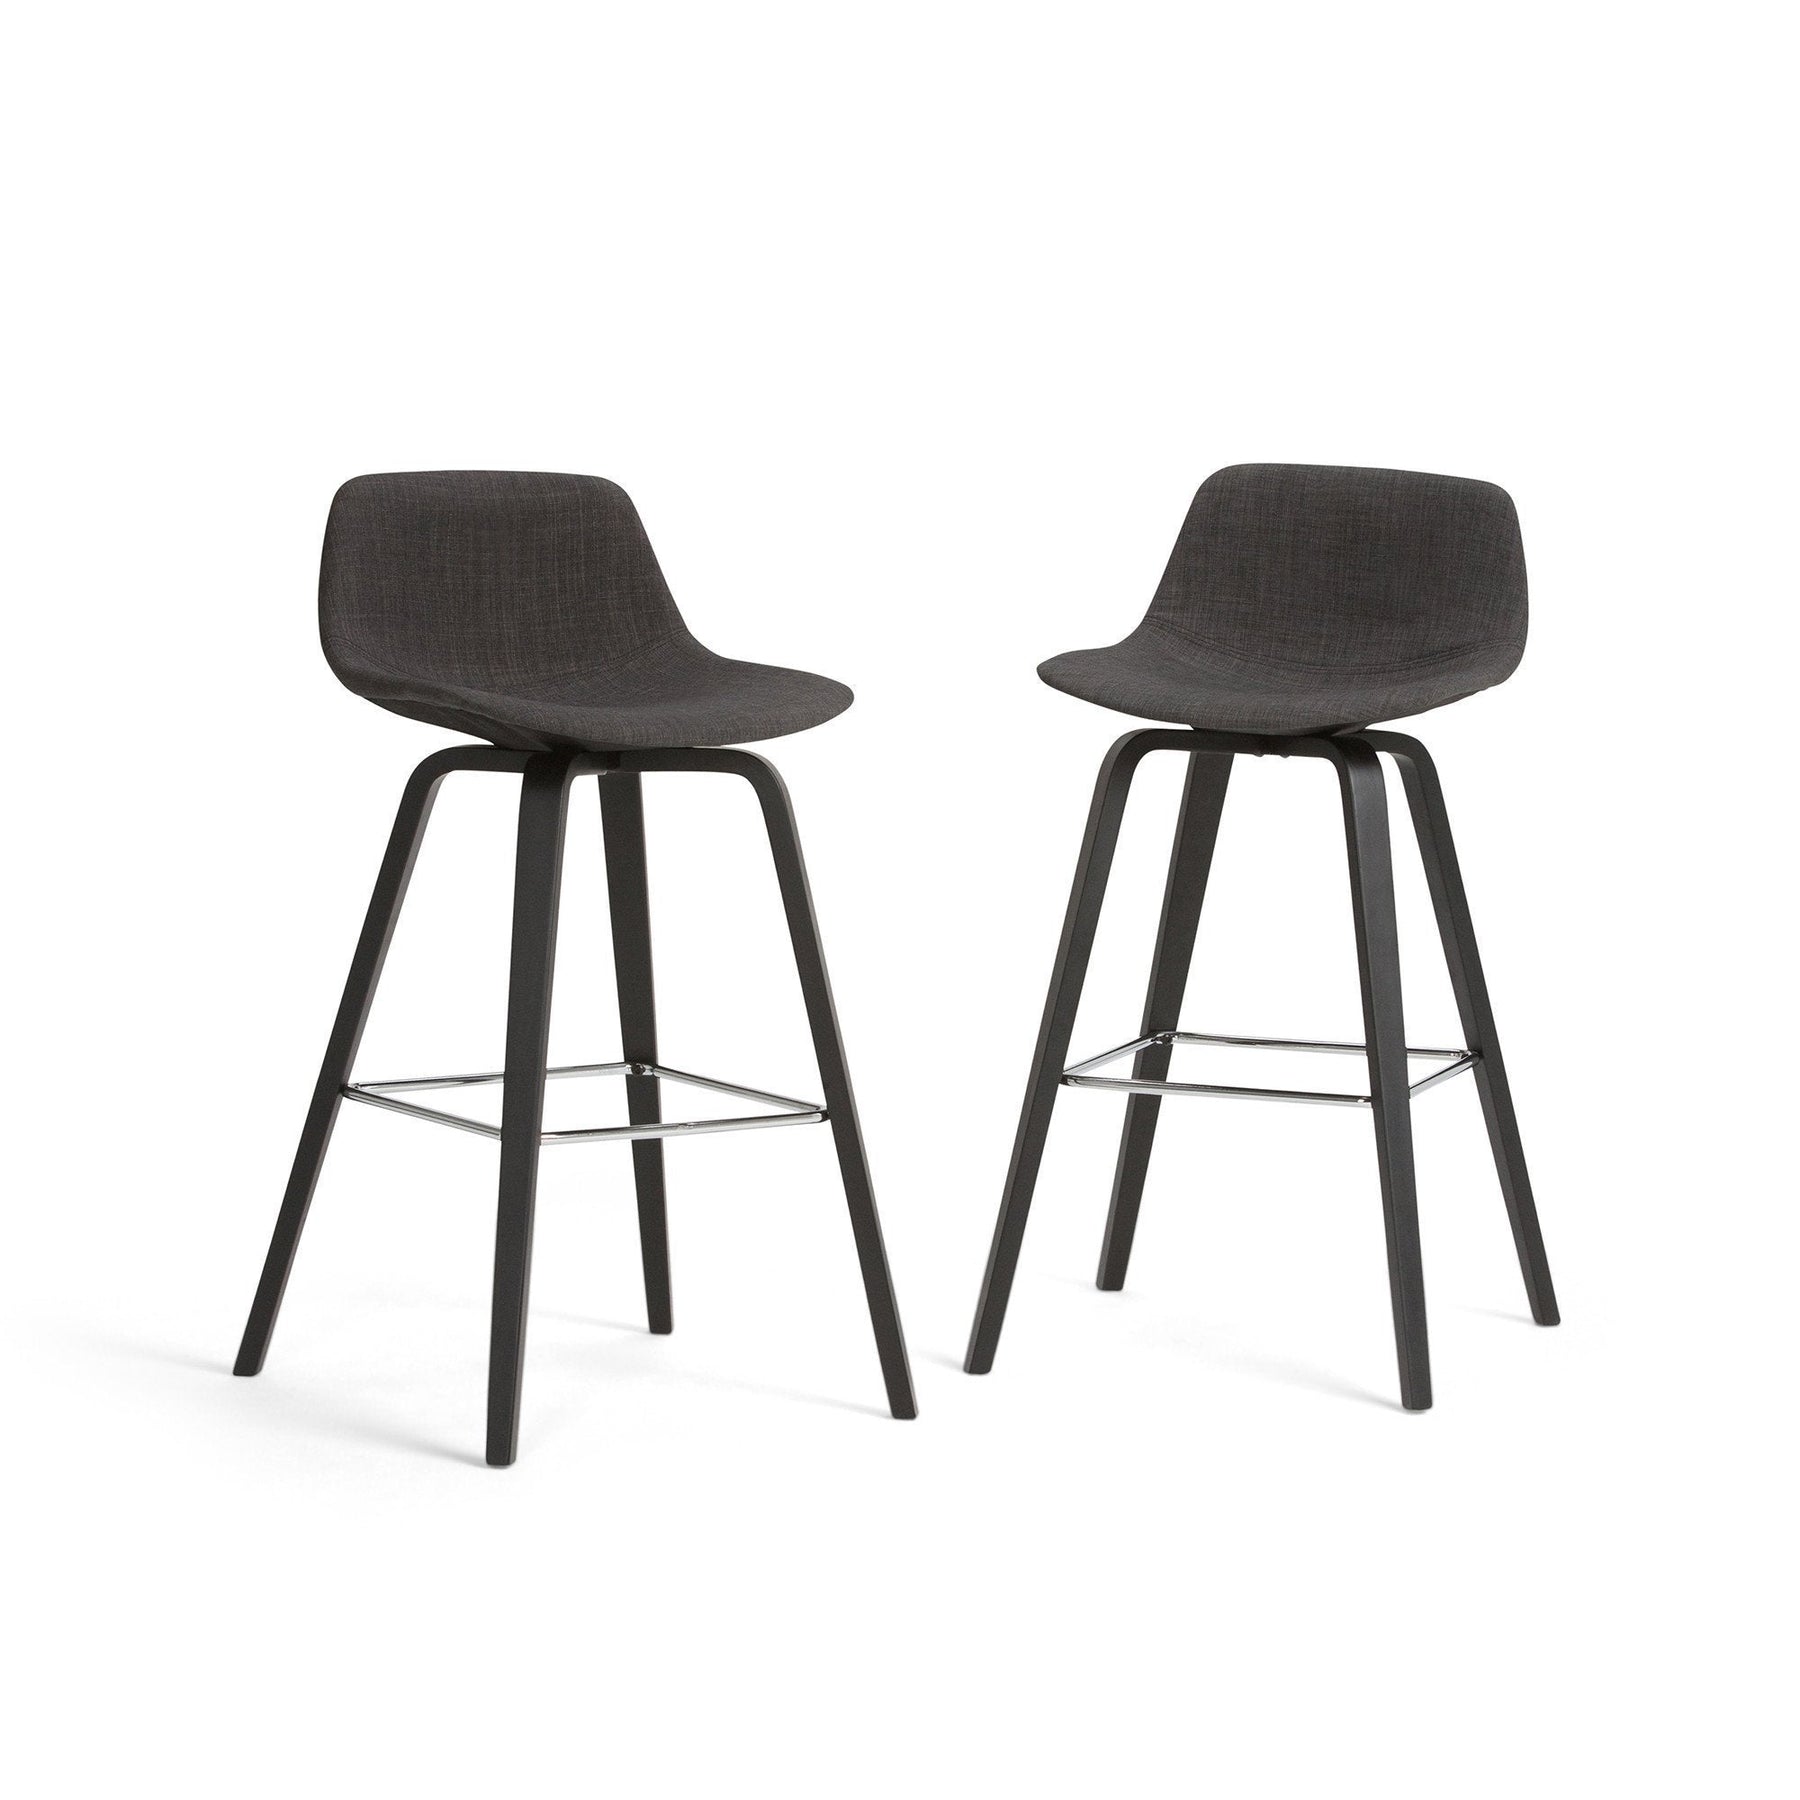 Black and Charcoal Linen Style Fabric Black | Randolph Bentwood 26 inch Bar Stool (Set of 2)